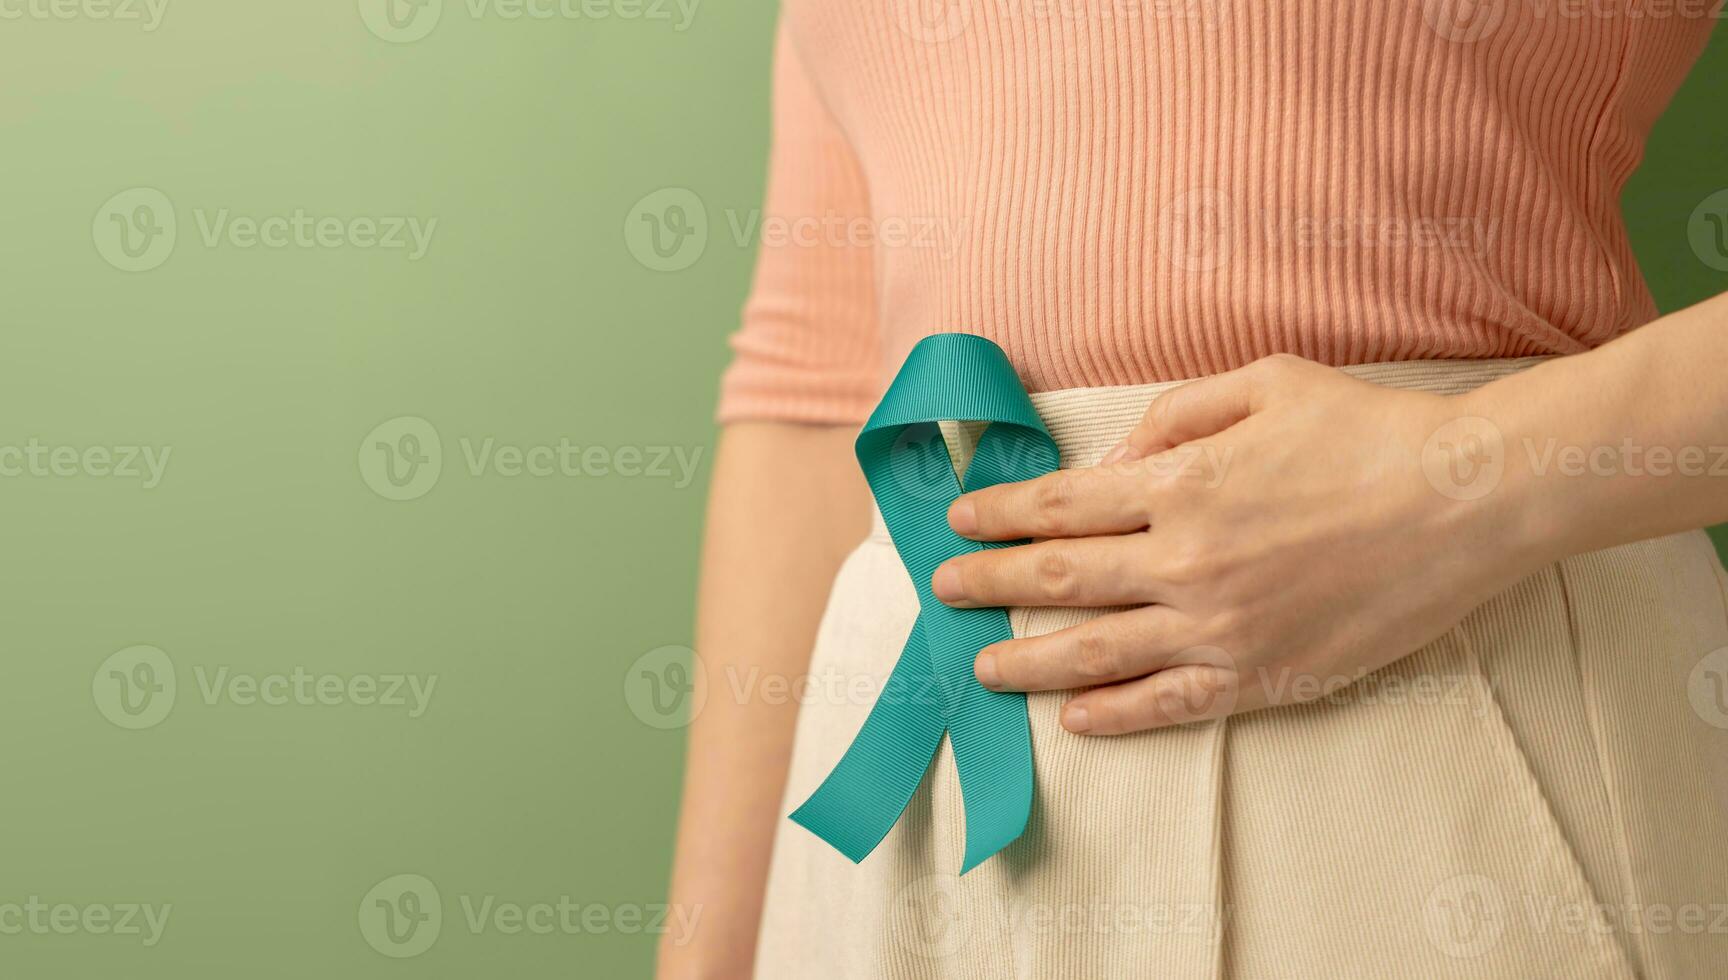 Ovarian and Cervical Cancer Awareness. Woman Holding Teal Ribbon on Lower Abdomen, Uterus, Female Reproductive System, Women's Health, PCOS and Gynecology photo